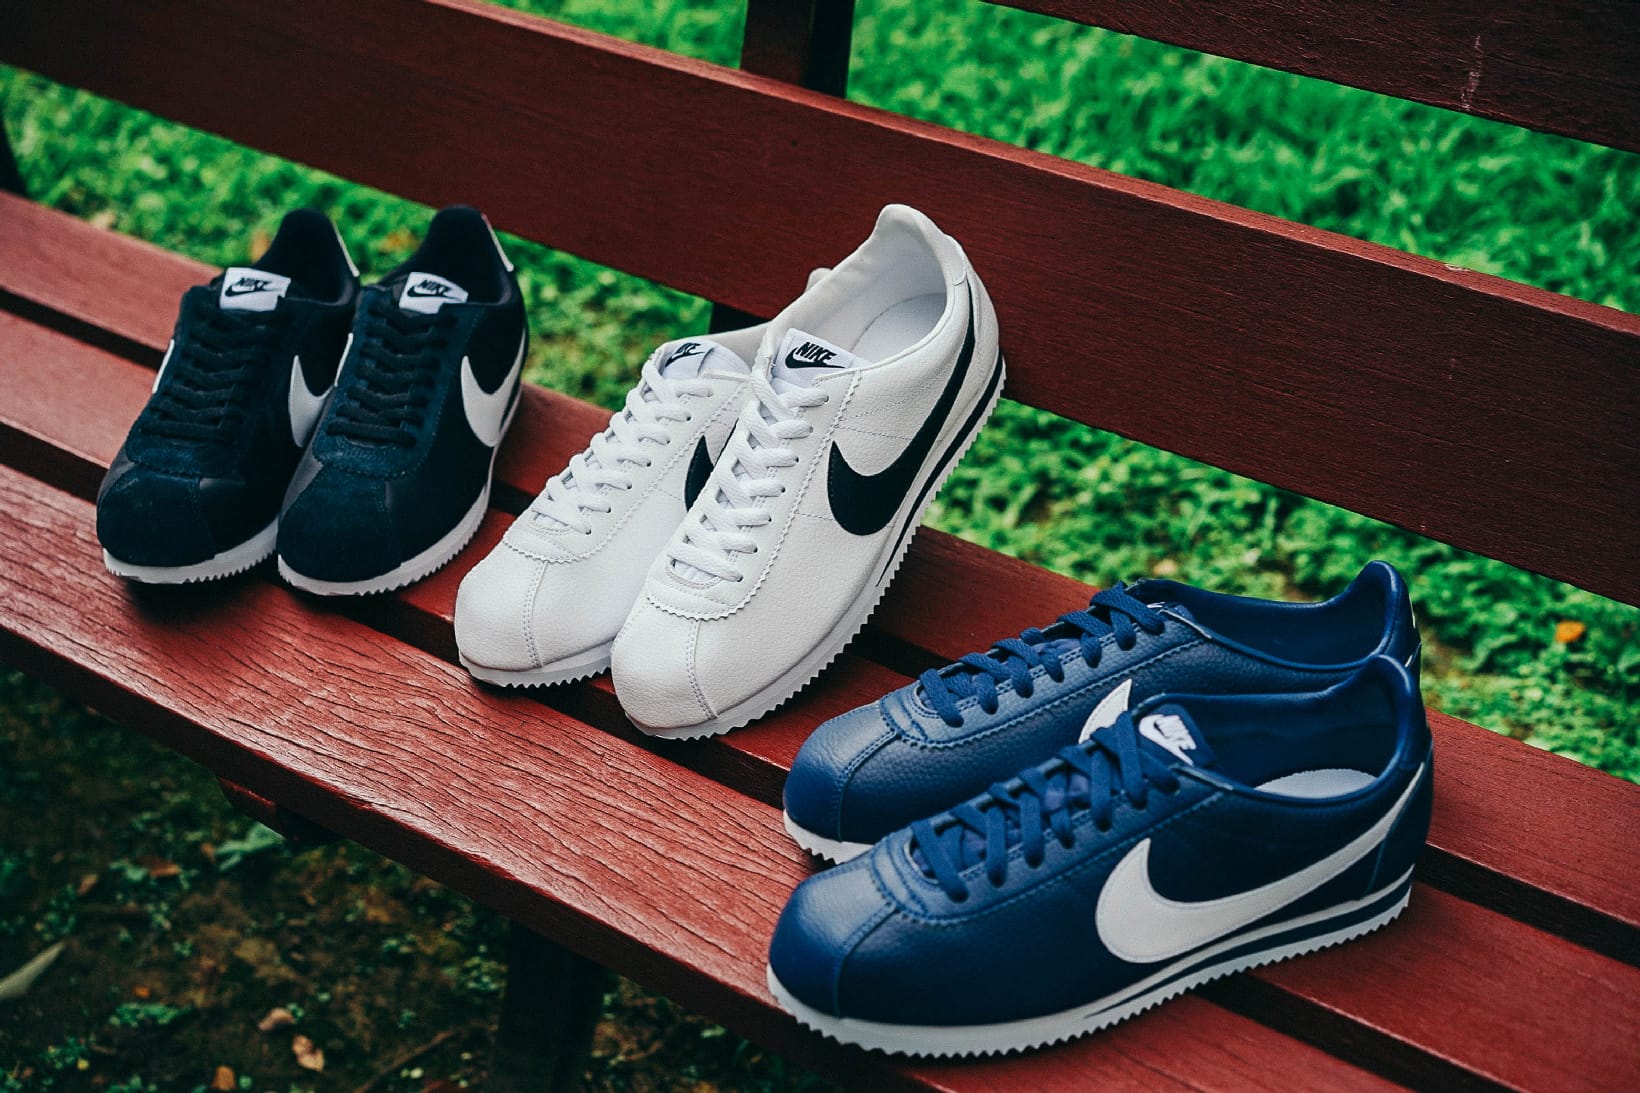 Nike Cortez Returns in Three Colors for Summer | HYPEBEAST